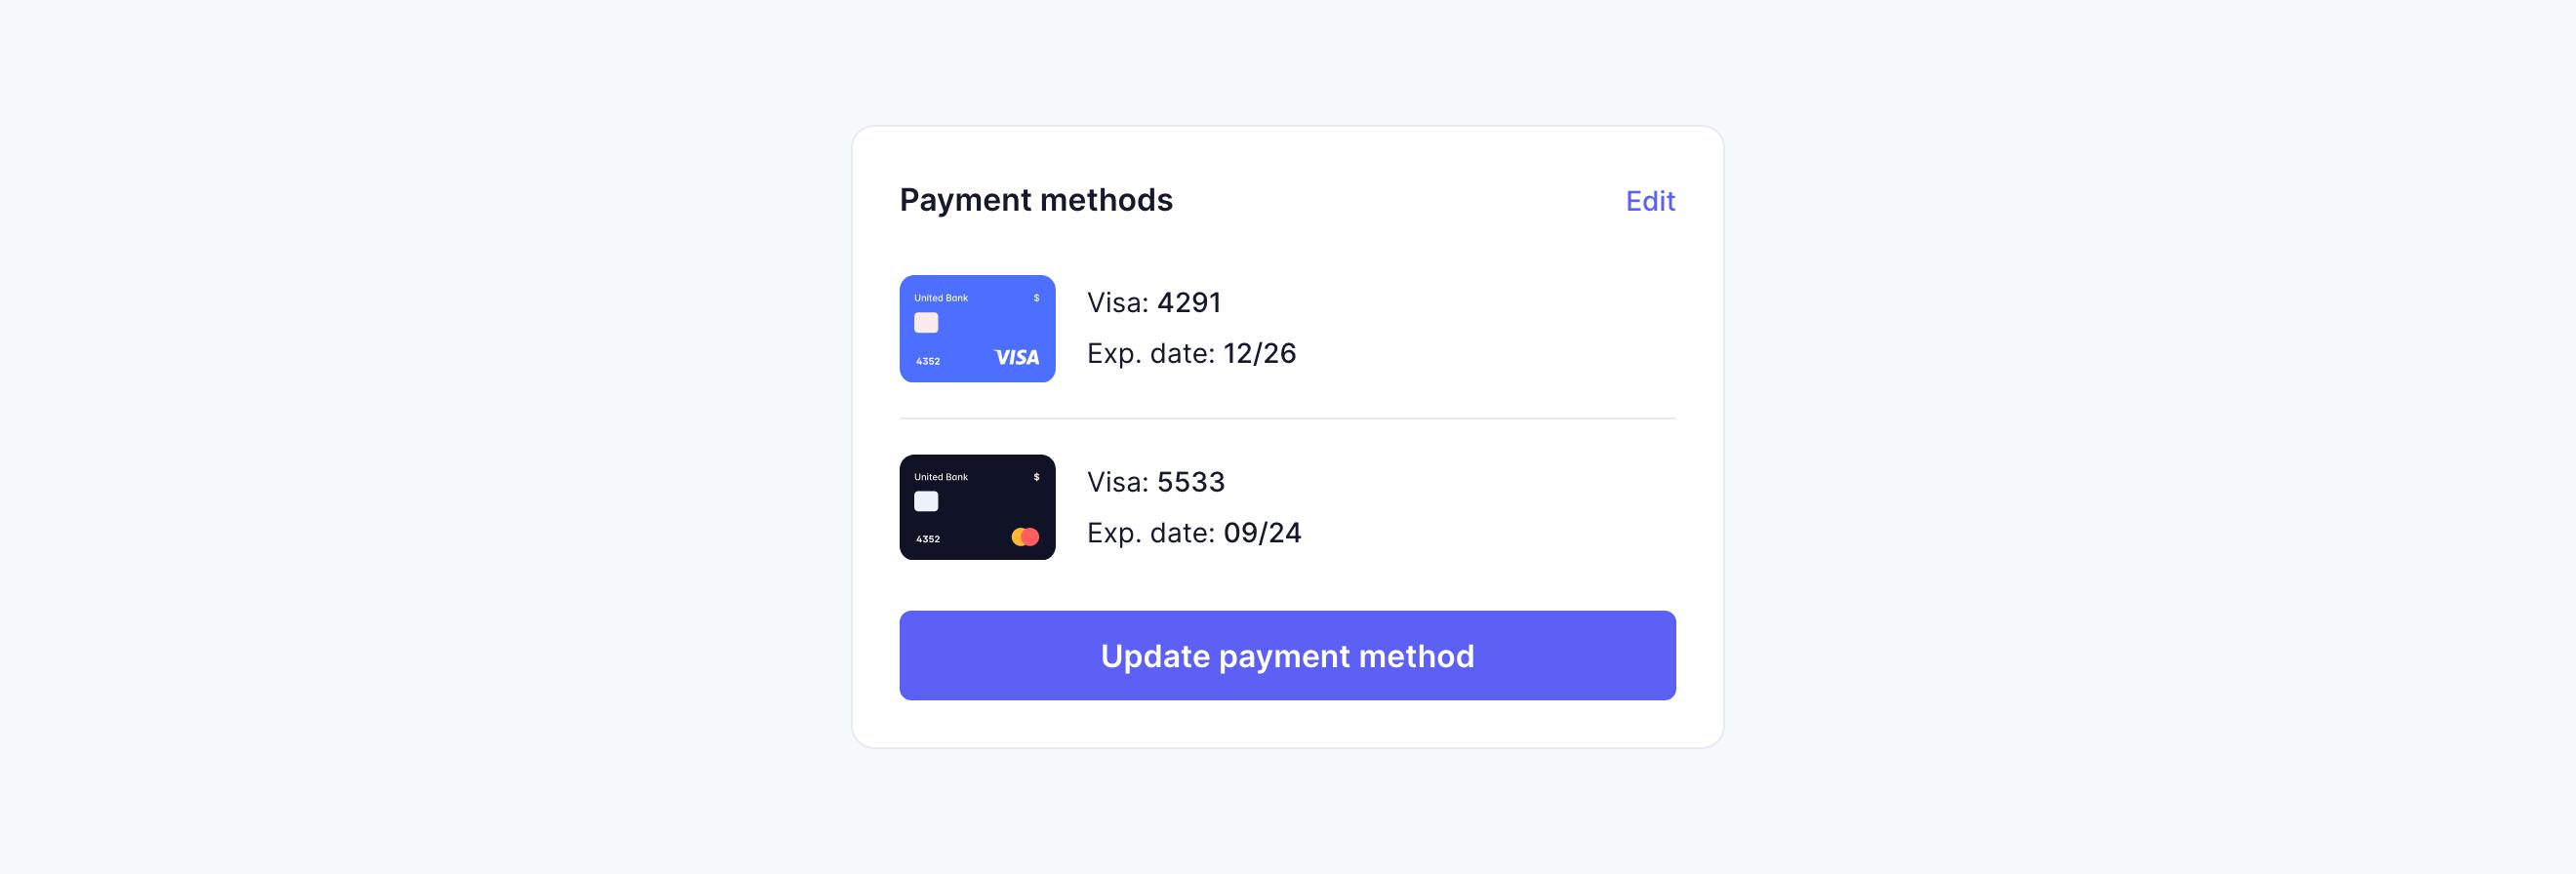 With payment methods and button